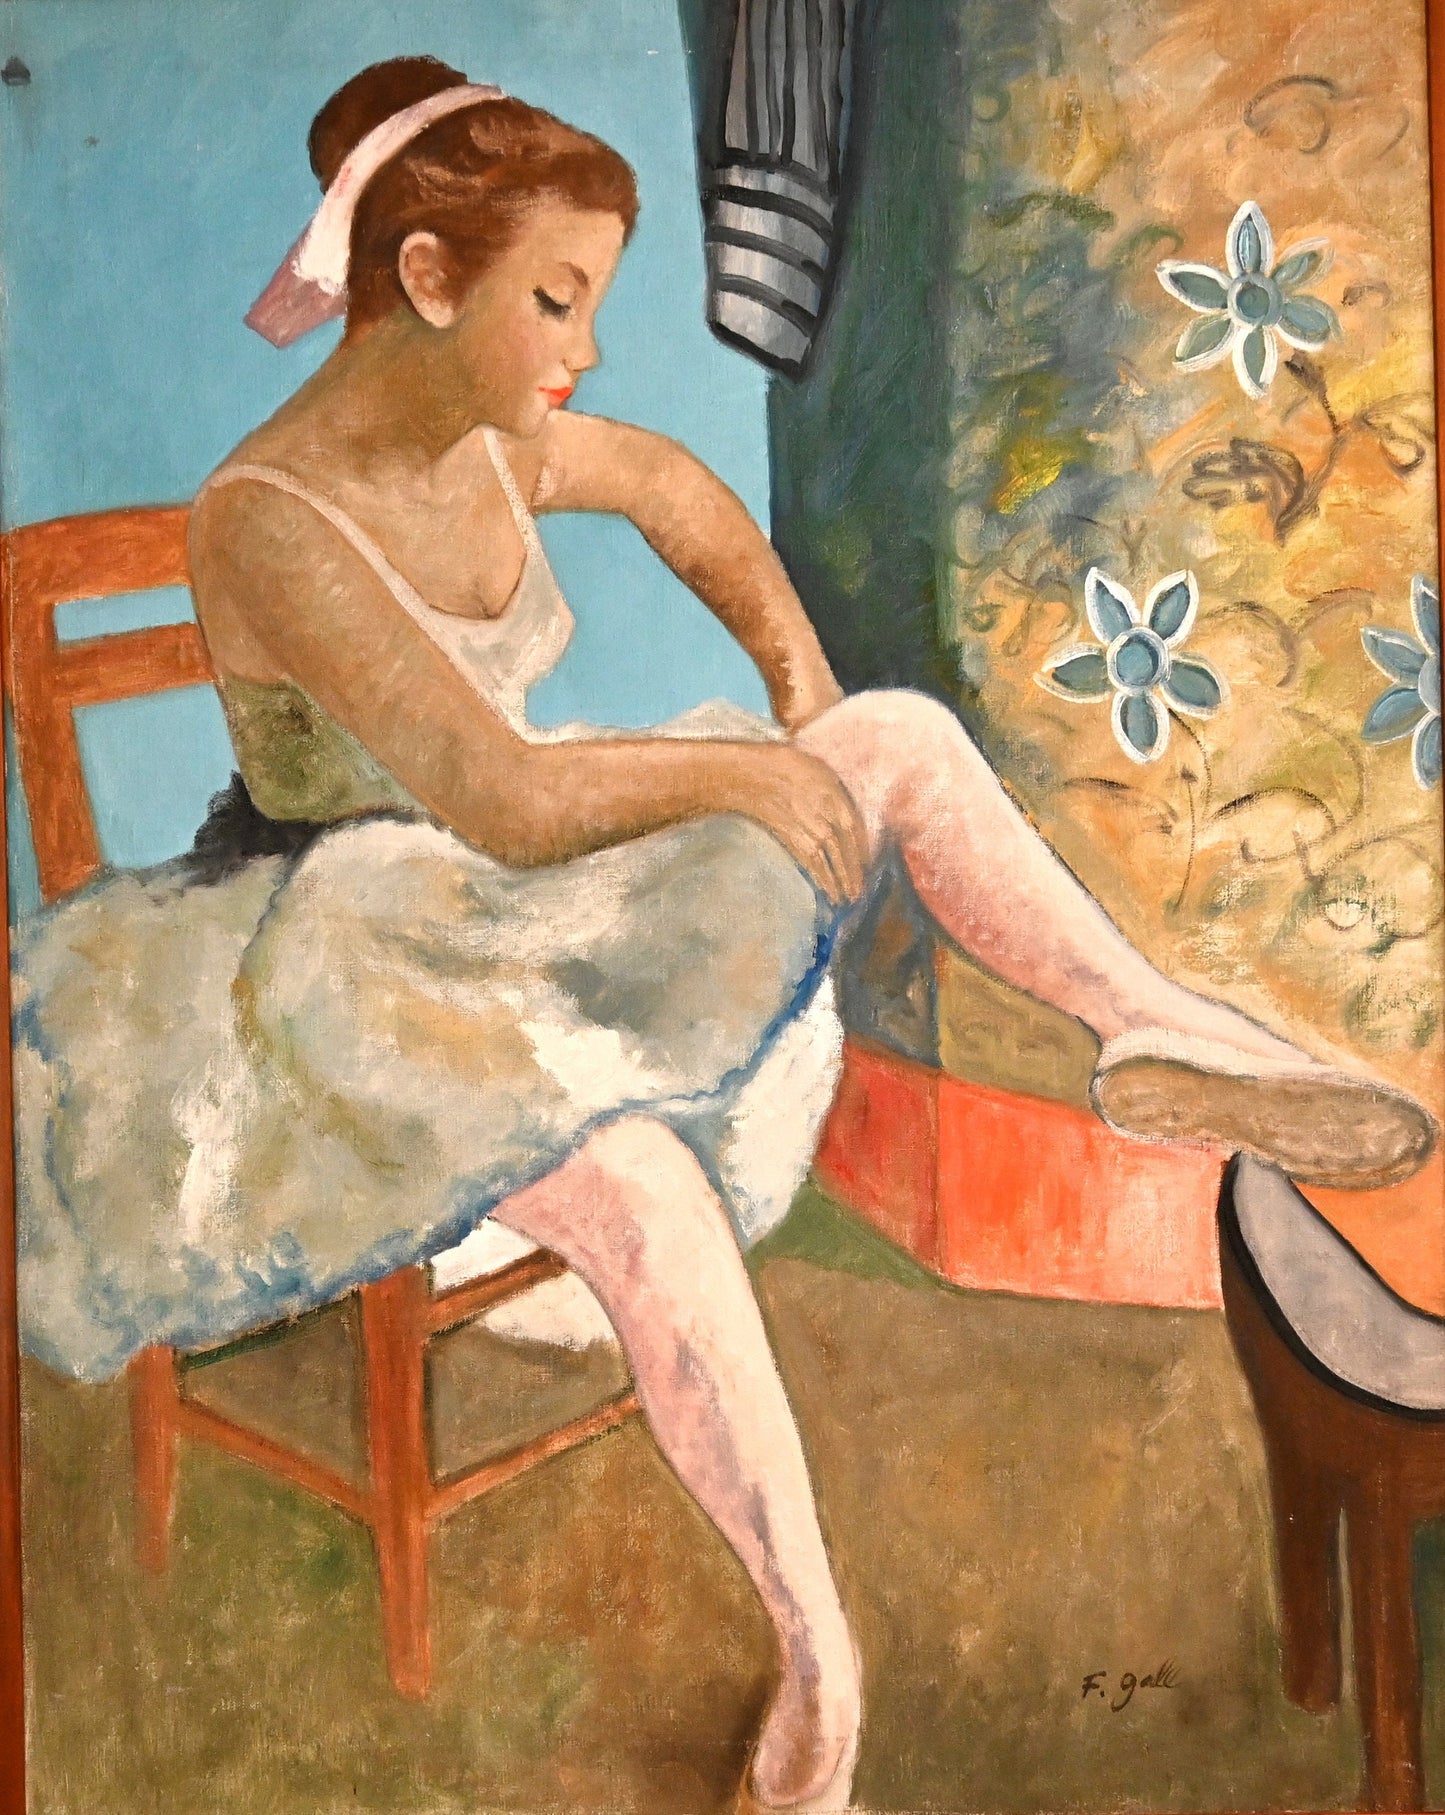 Francois Gall (1912-1987) Original Oil 'Ballerina' High prices Sotheby's & Christies- 37.5"H x 30"W- Vibrant colors Museum Artist!